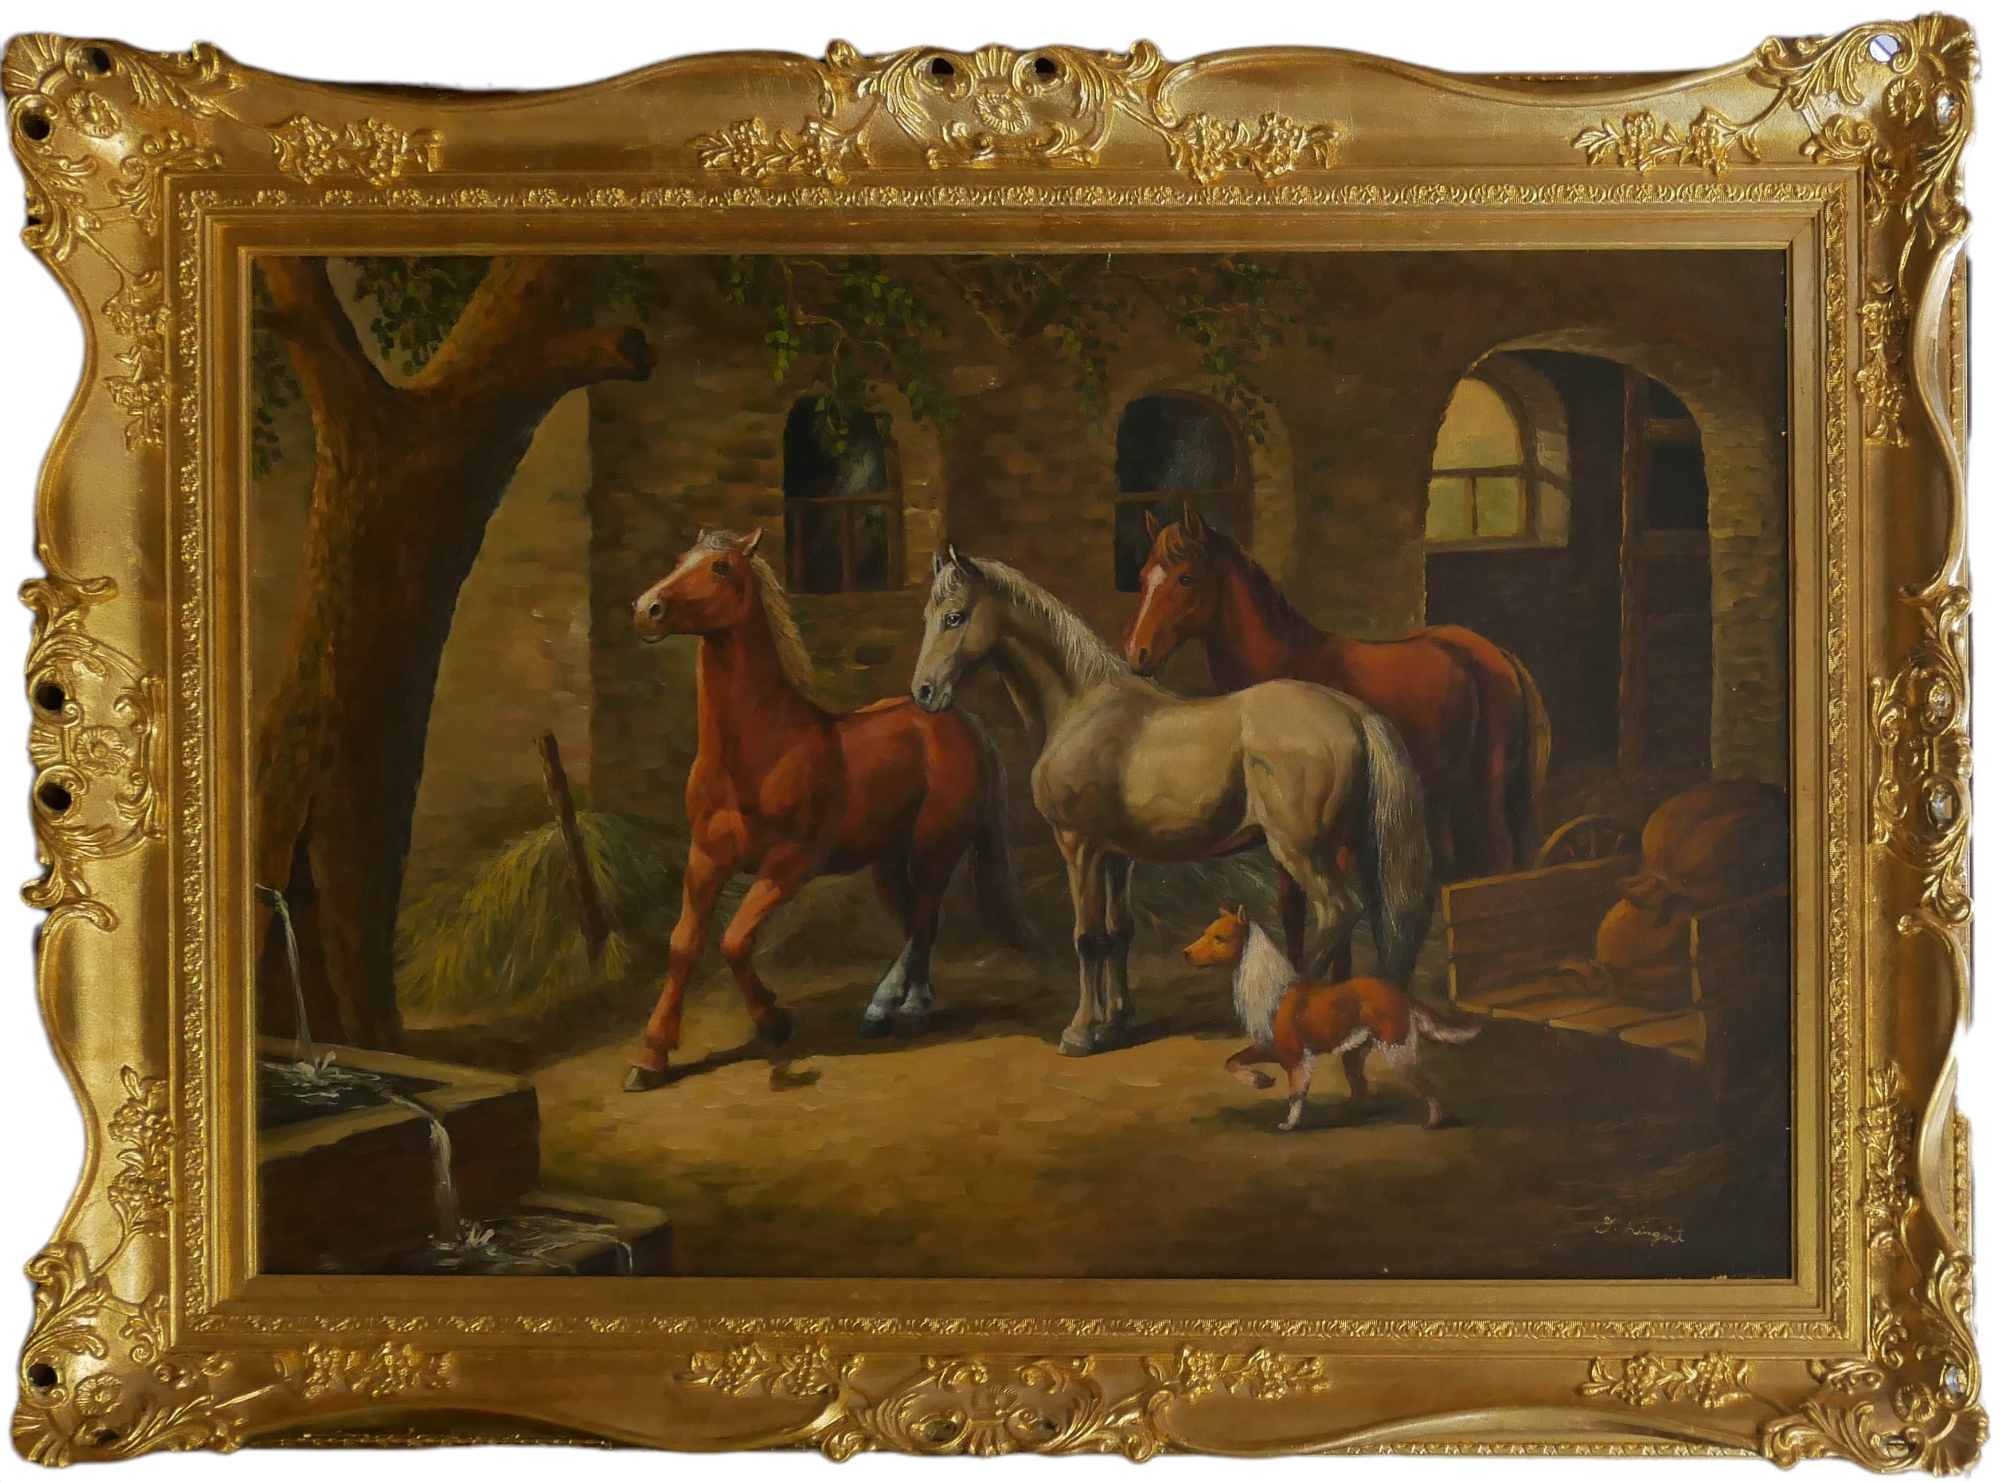 J. KNIGHT, A 20TH CENTURY OIL ON CANVAS Horses in yard with a collie dog alongside, in a heavy